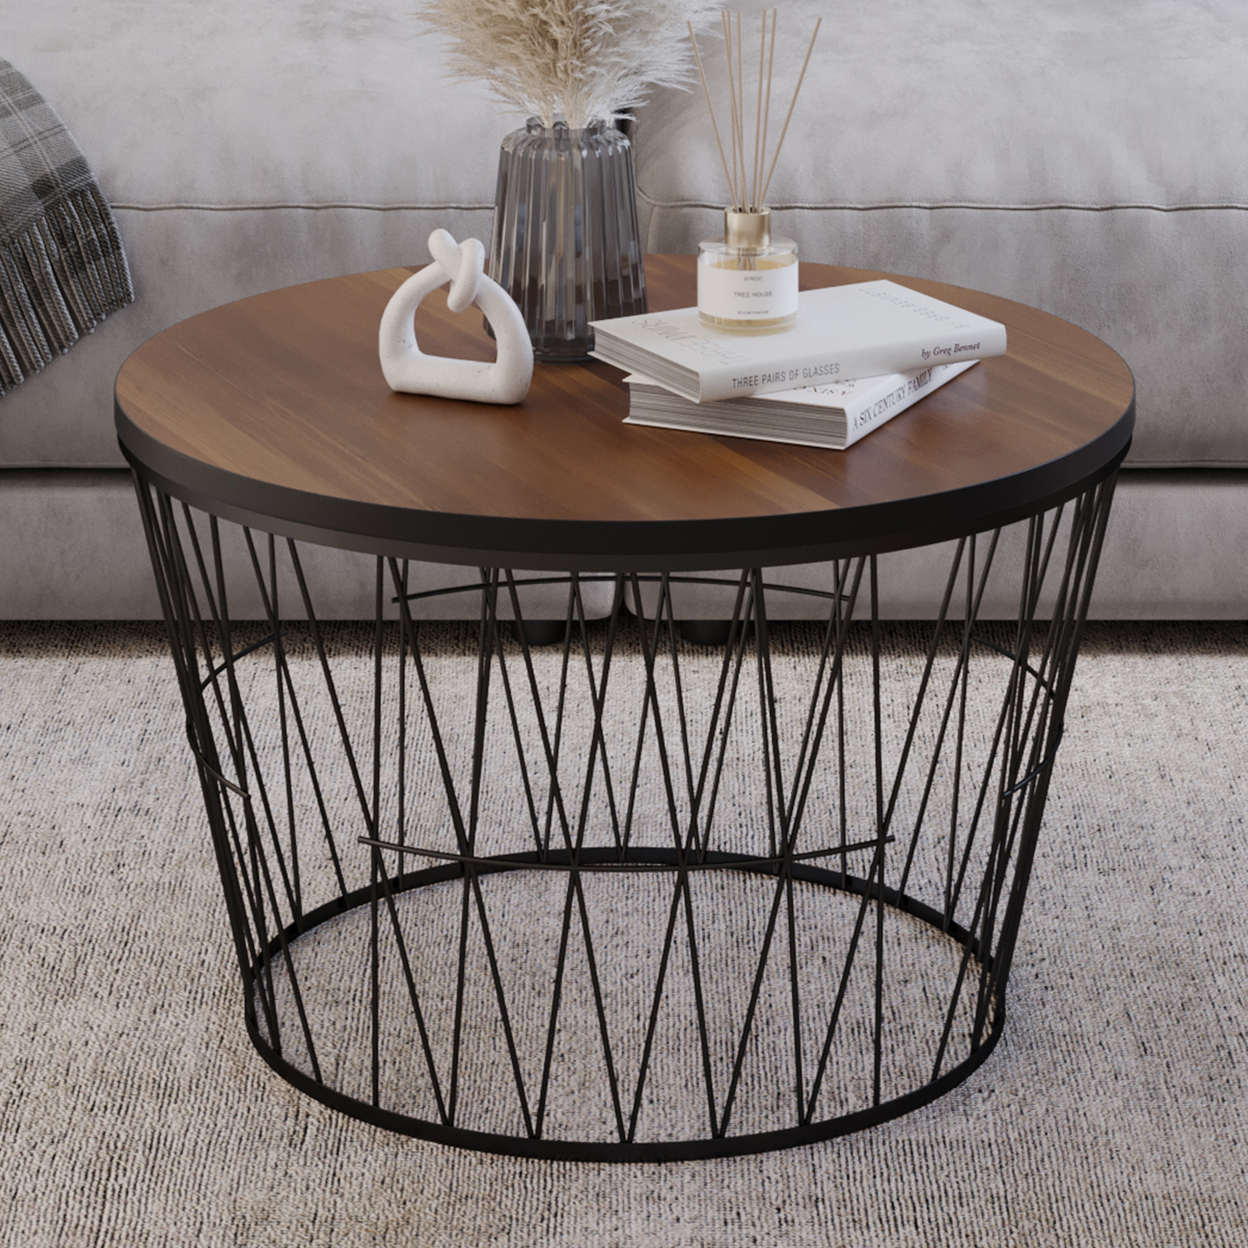 Round Coffee Table With Metal BaseSmall Modern Accent Table 23.5 W X 15 H